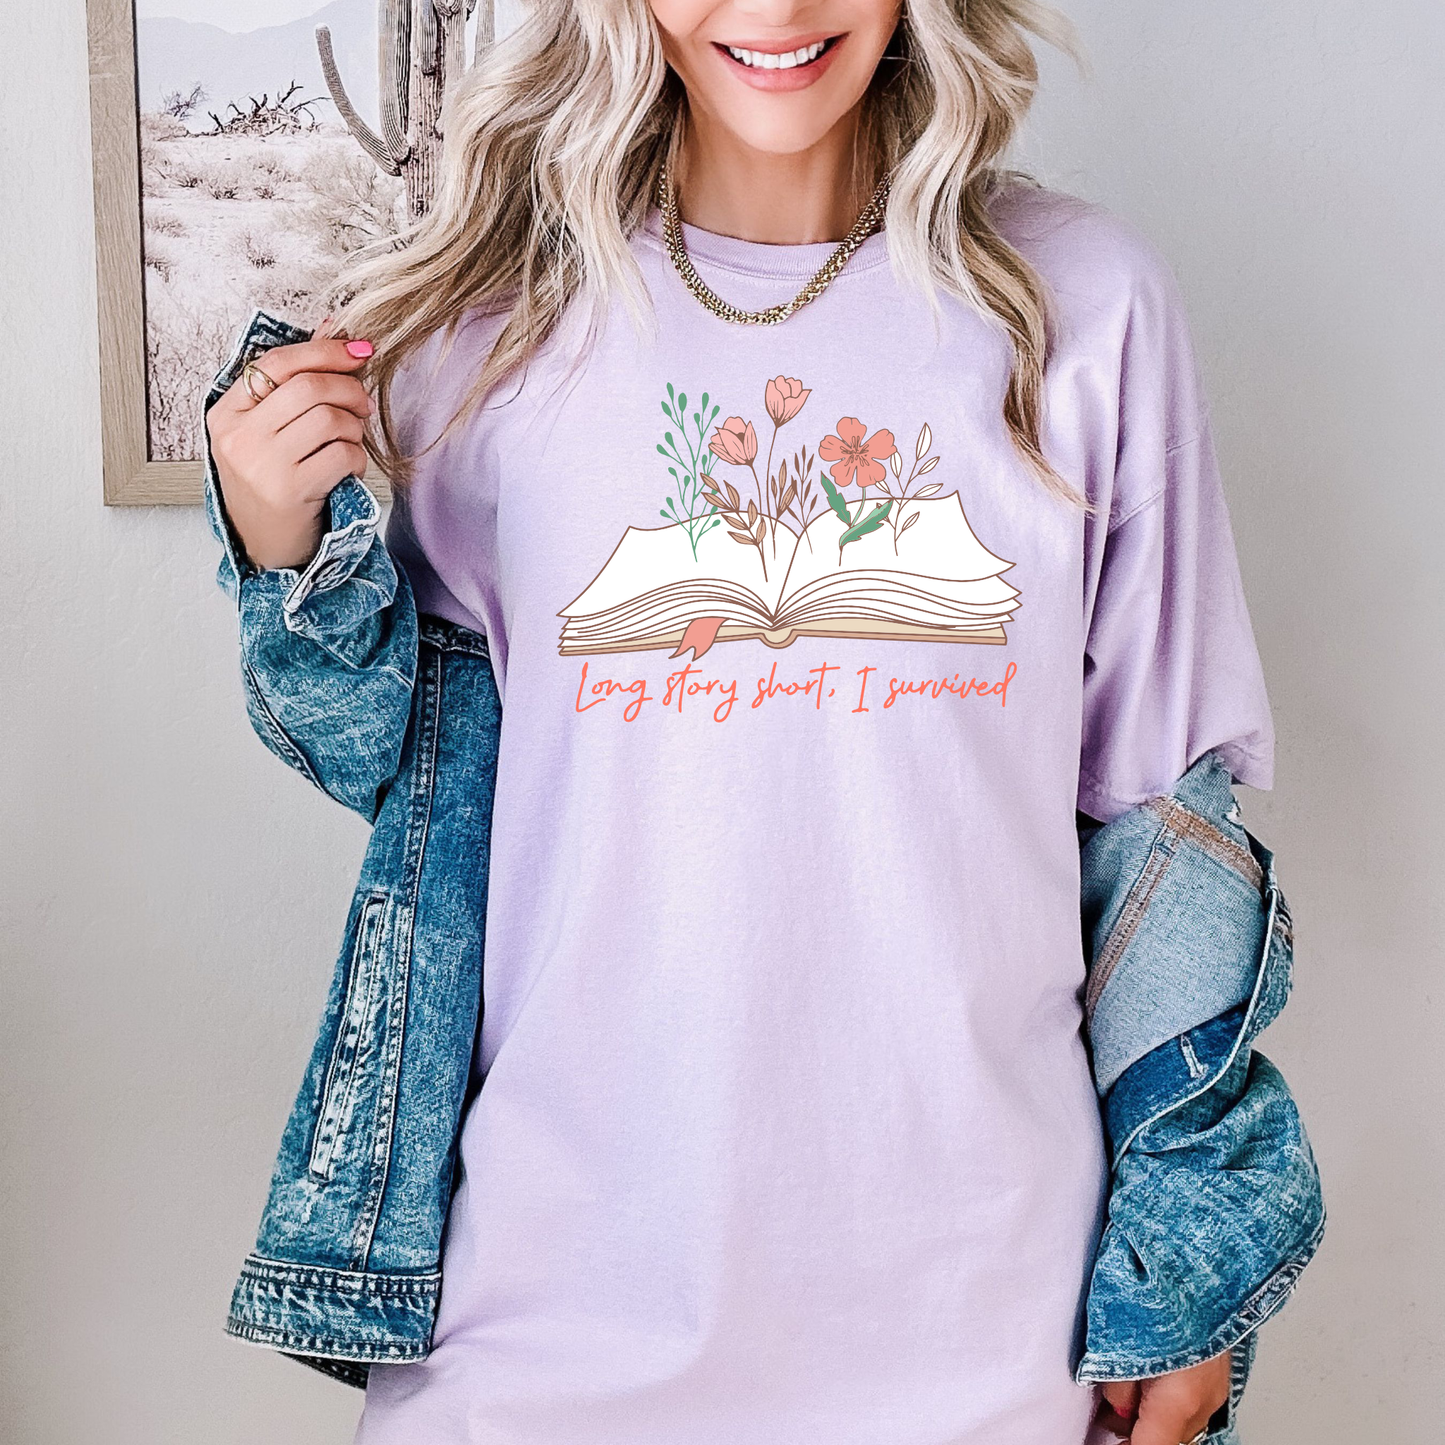 Long Story Short, I Survived -The Eras Tour - Taylor Swift - Adult & Youth Comfort Colors Concert Tee